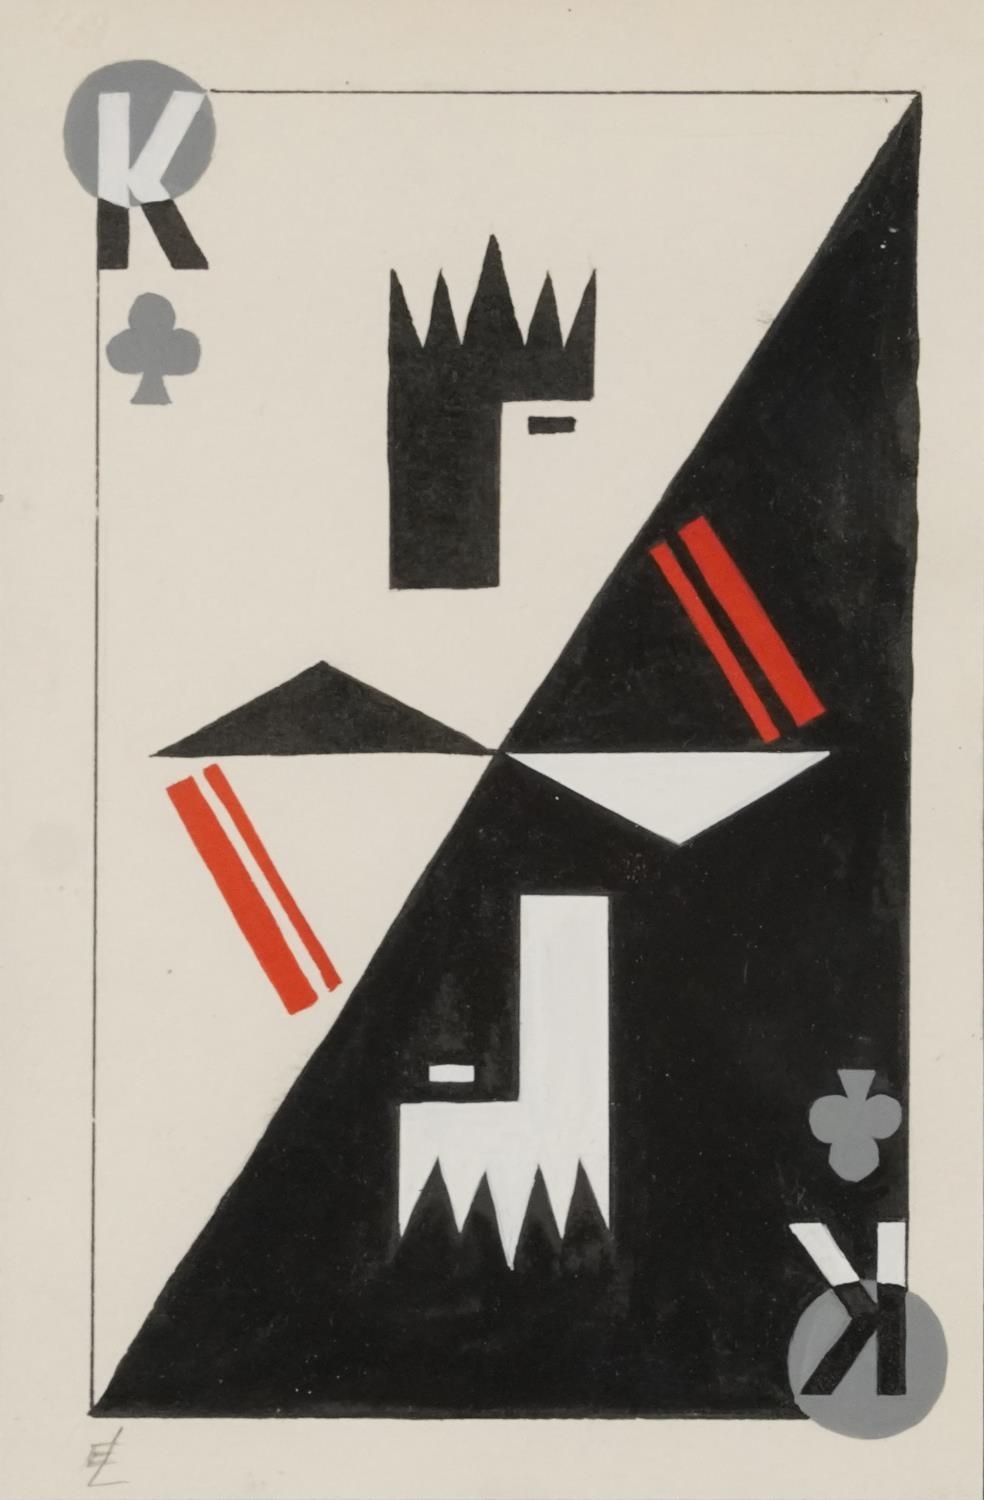 Artwork by El Lissitzky, Playing Cards, Made of mixed media